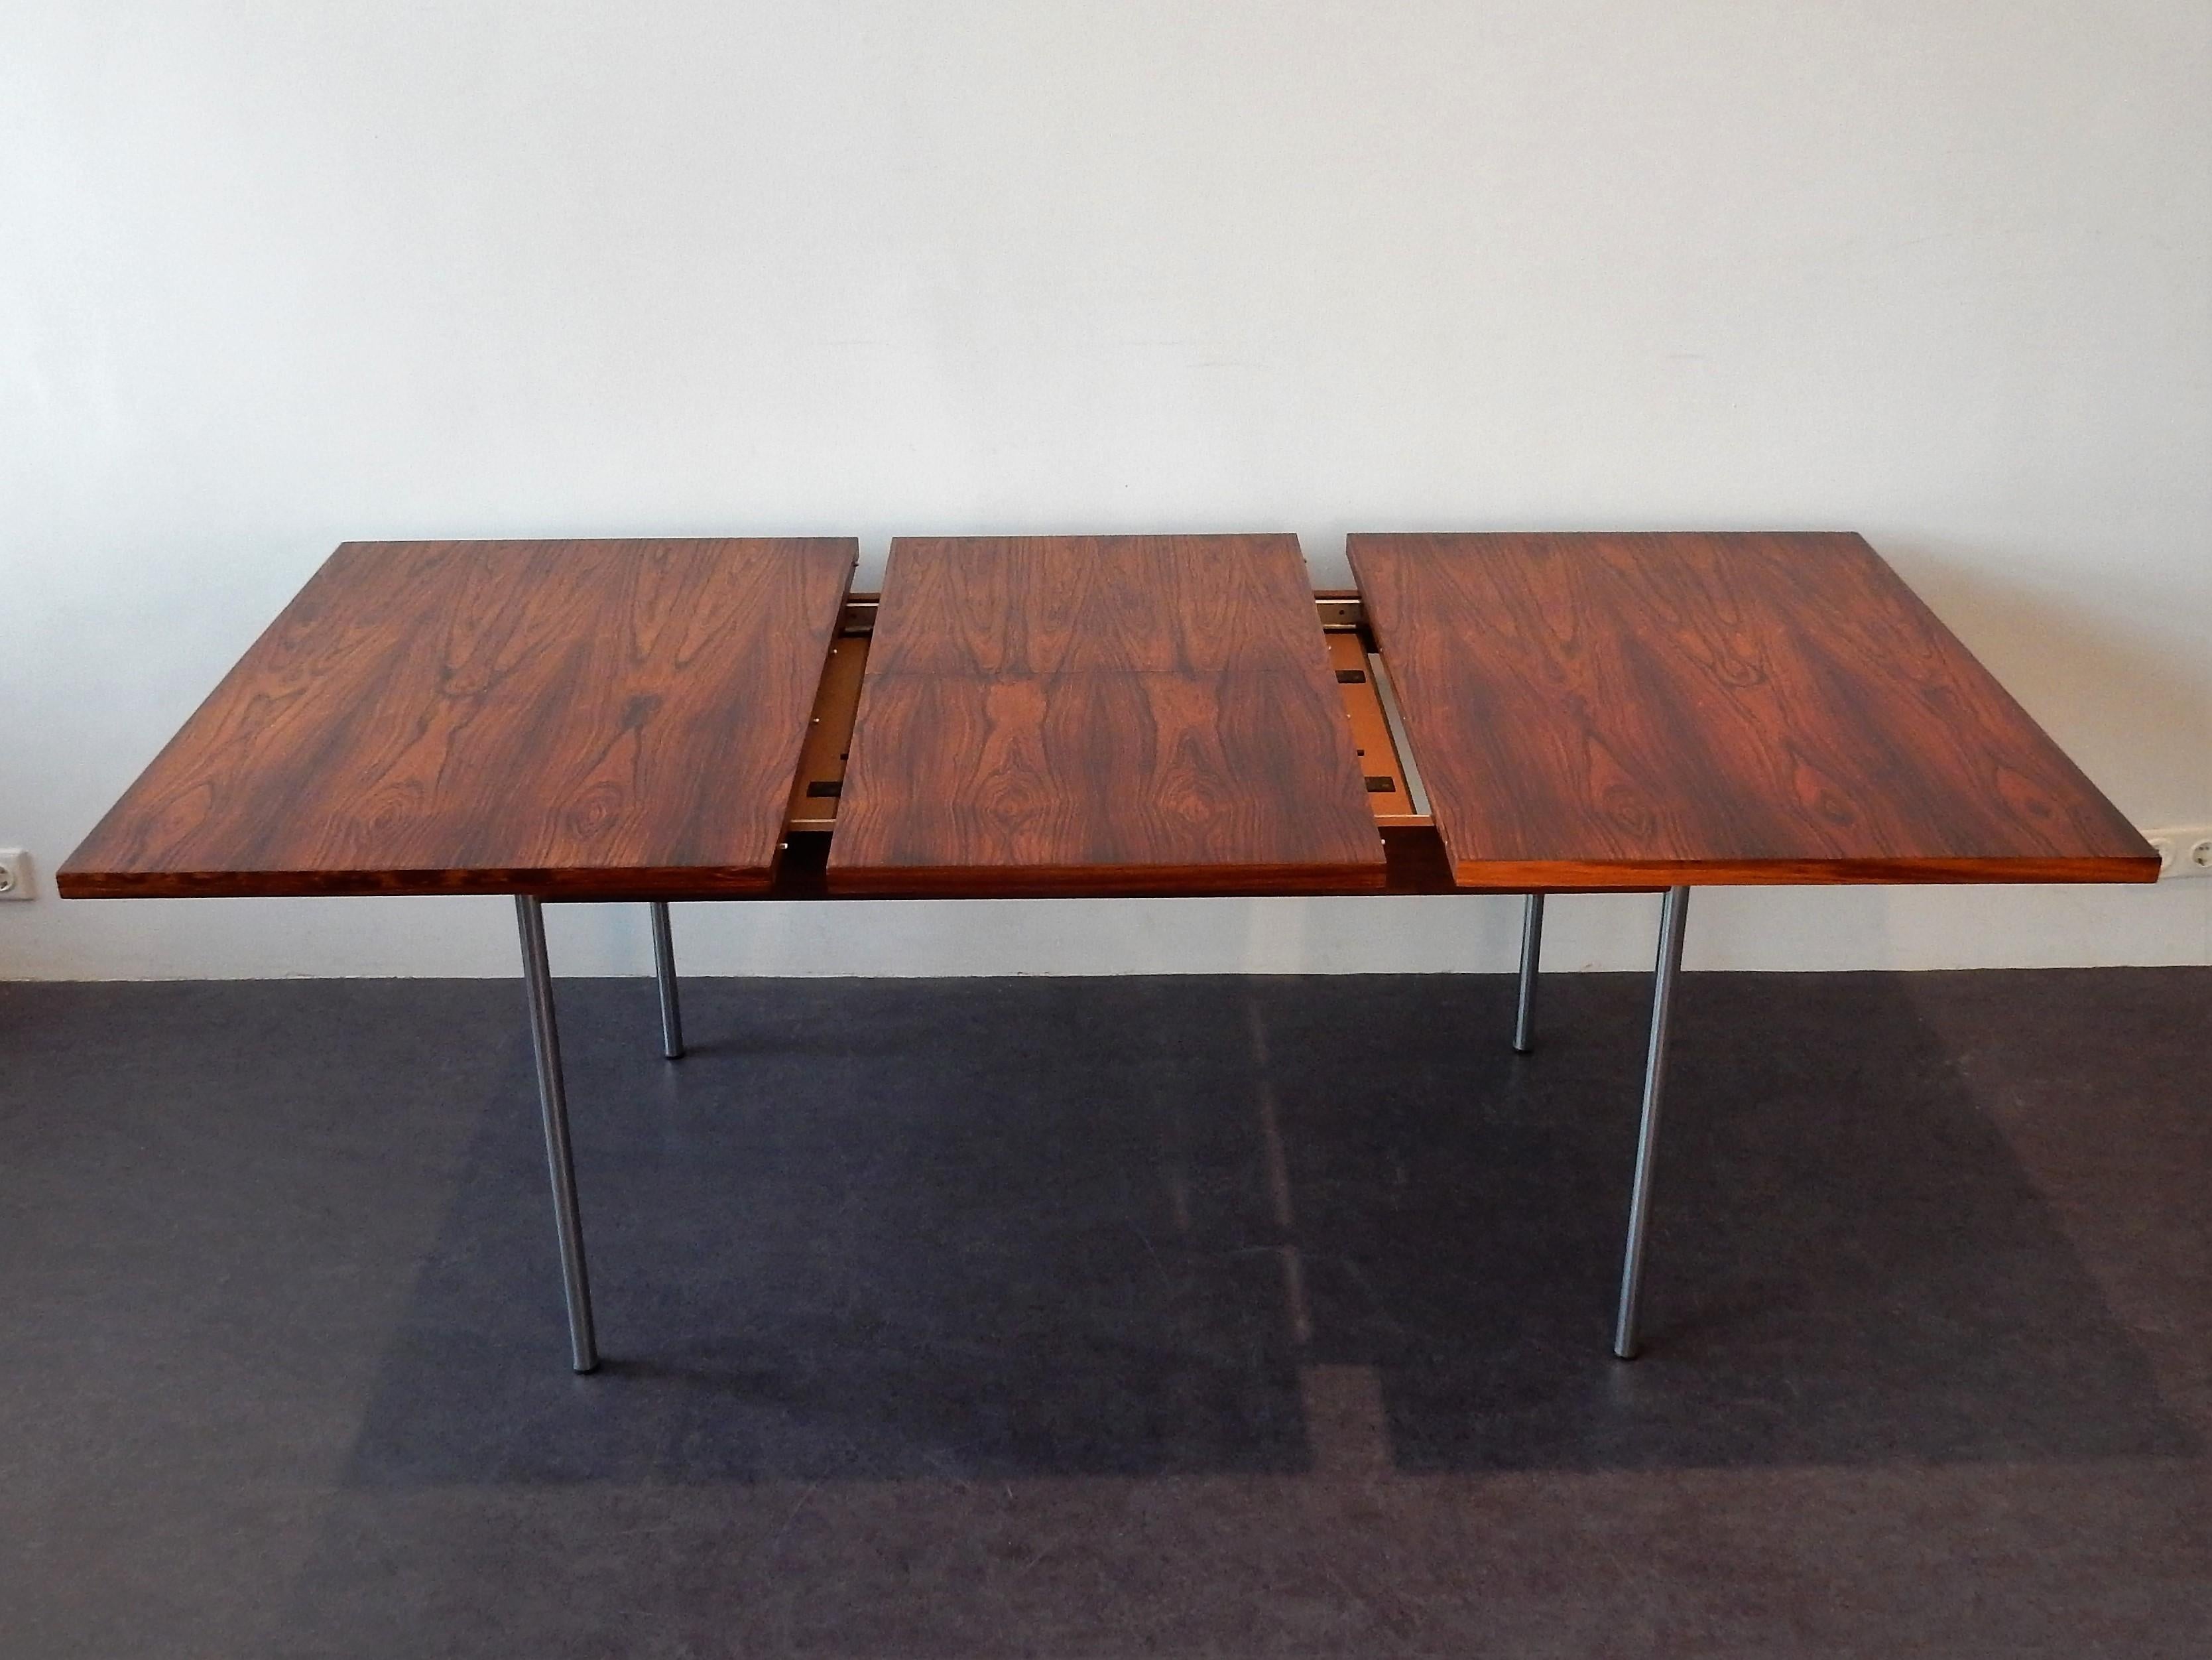 Beautiful rosewood veneered top dining table. A design by Cees Braakman for Pastoe from the 1960s. When we sourced this table it did have some smaller pieces of veneer missing. This has been professionally restored by our restorer. The extension